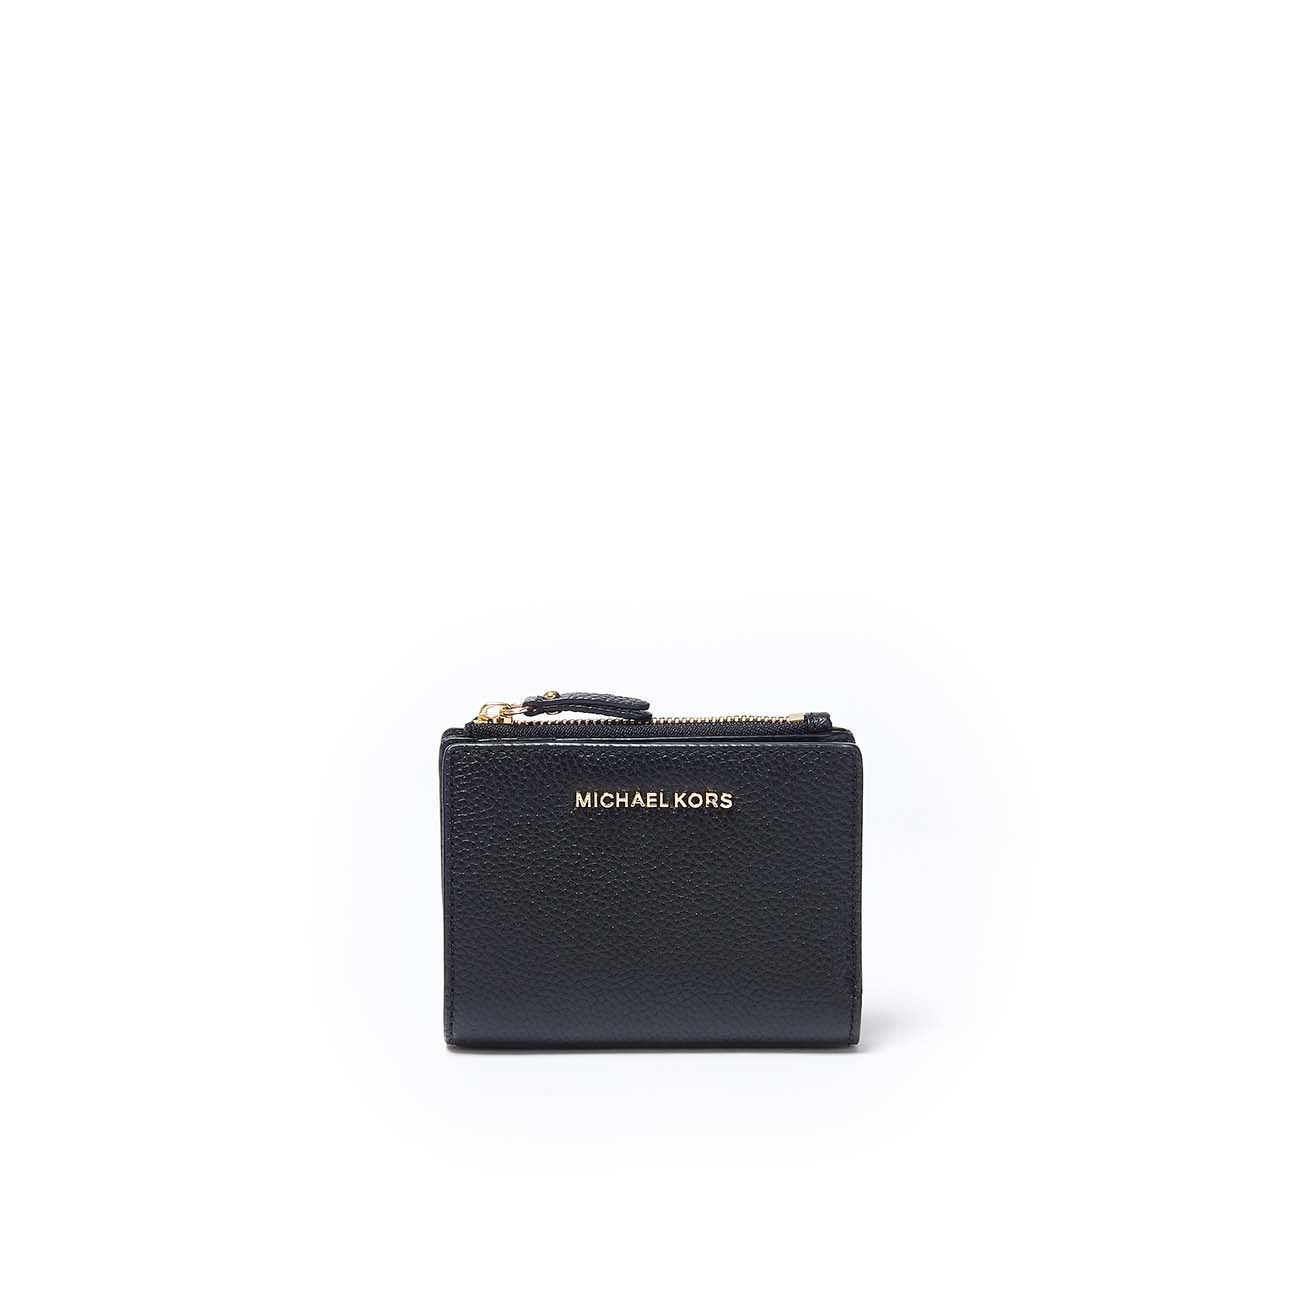 MICHAEL KORS SMALL JET SET CARD CASE IN PEBBLED LEATHER Woman Black